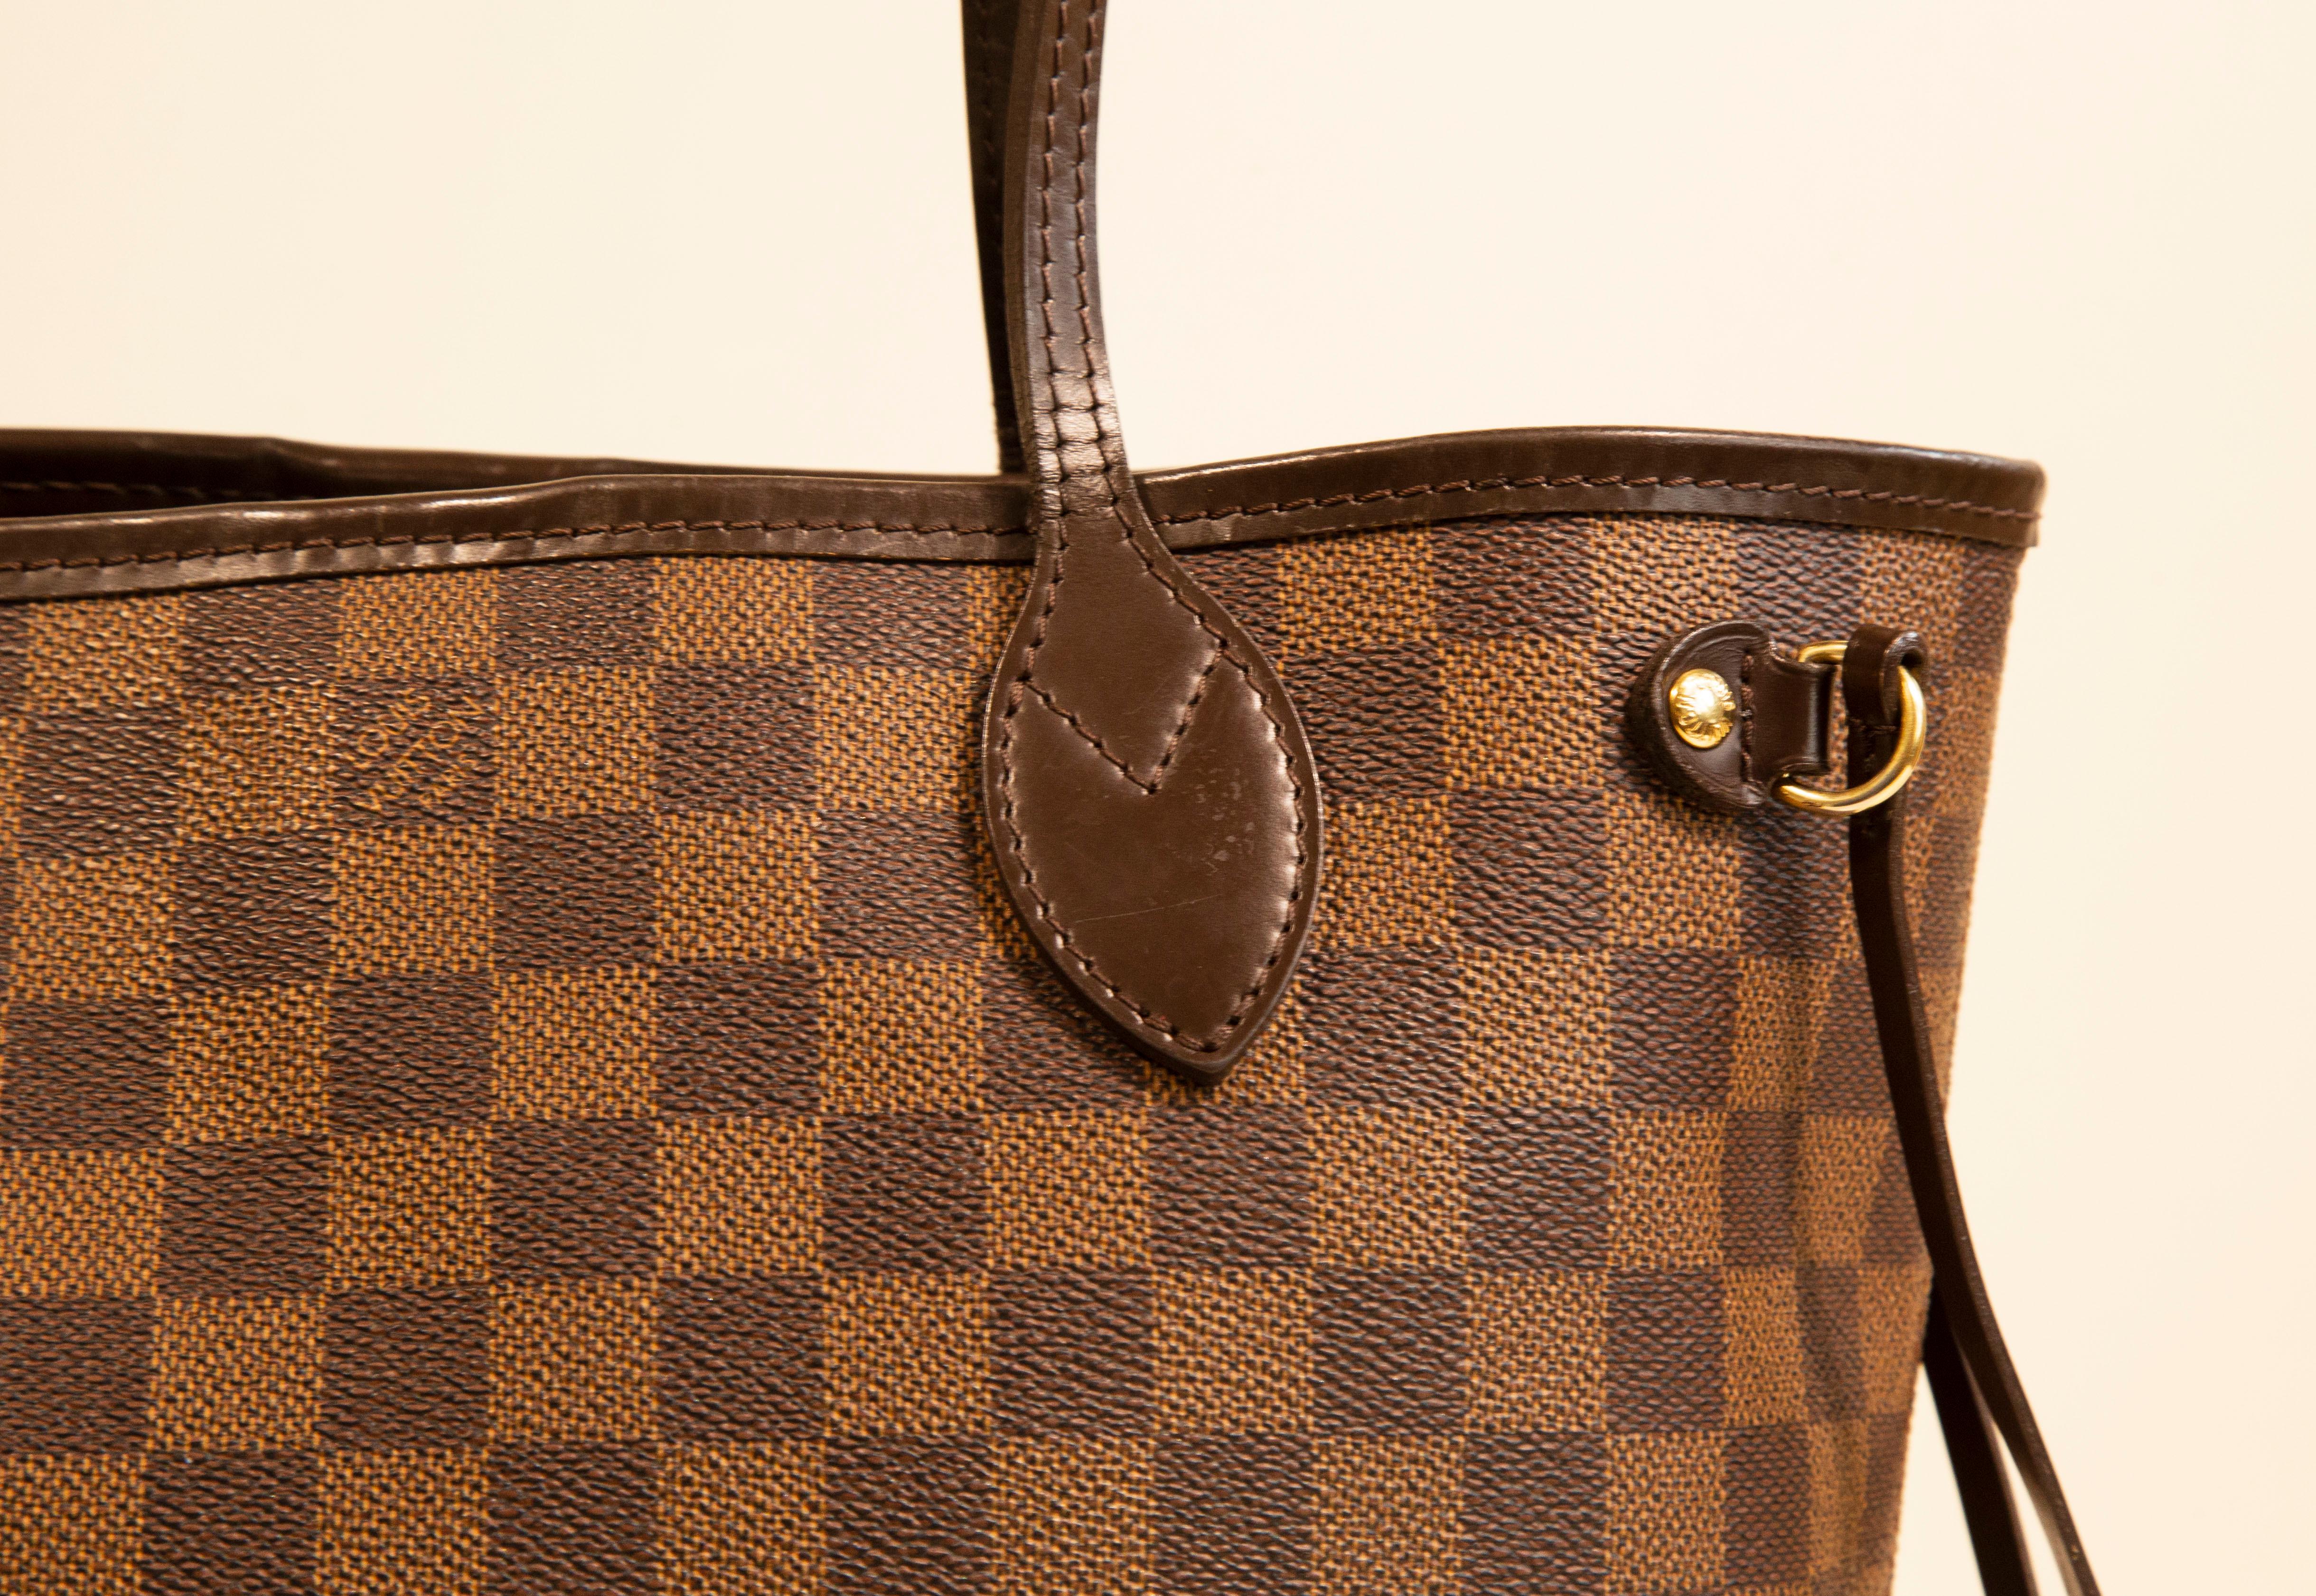 A Louis Vuitton Neverfull PM tote. The bag features a Damier Ebene exterior, with brown leather trim and gold-tone hardware. The interior is lined with red fabric. The exterior shows minor signs of use. The interior is clean, but there a few small